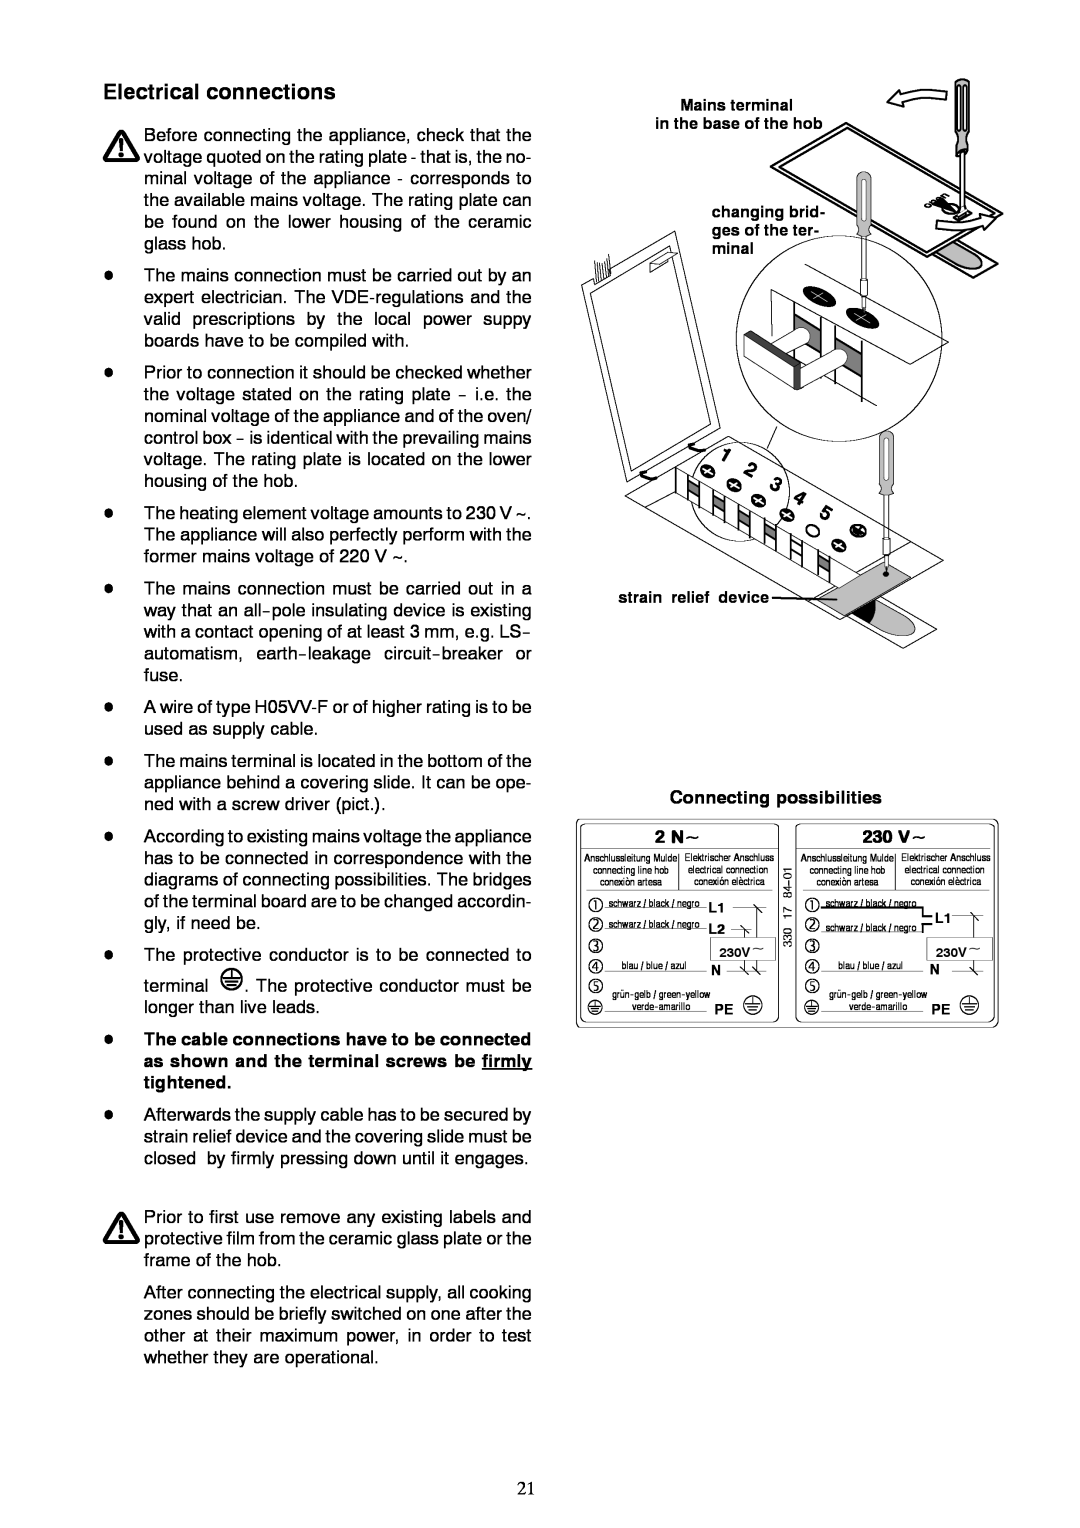 Zanussi ZKT 622 HX, ZKT 622 HN installation instructions Electrical connections, Connecting possibilities 